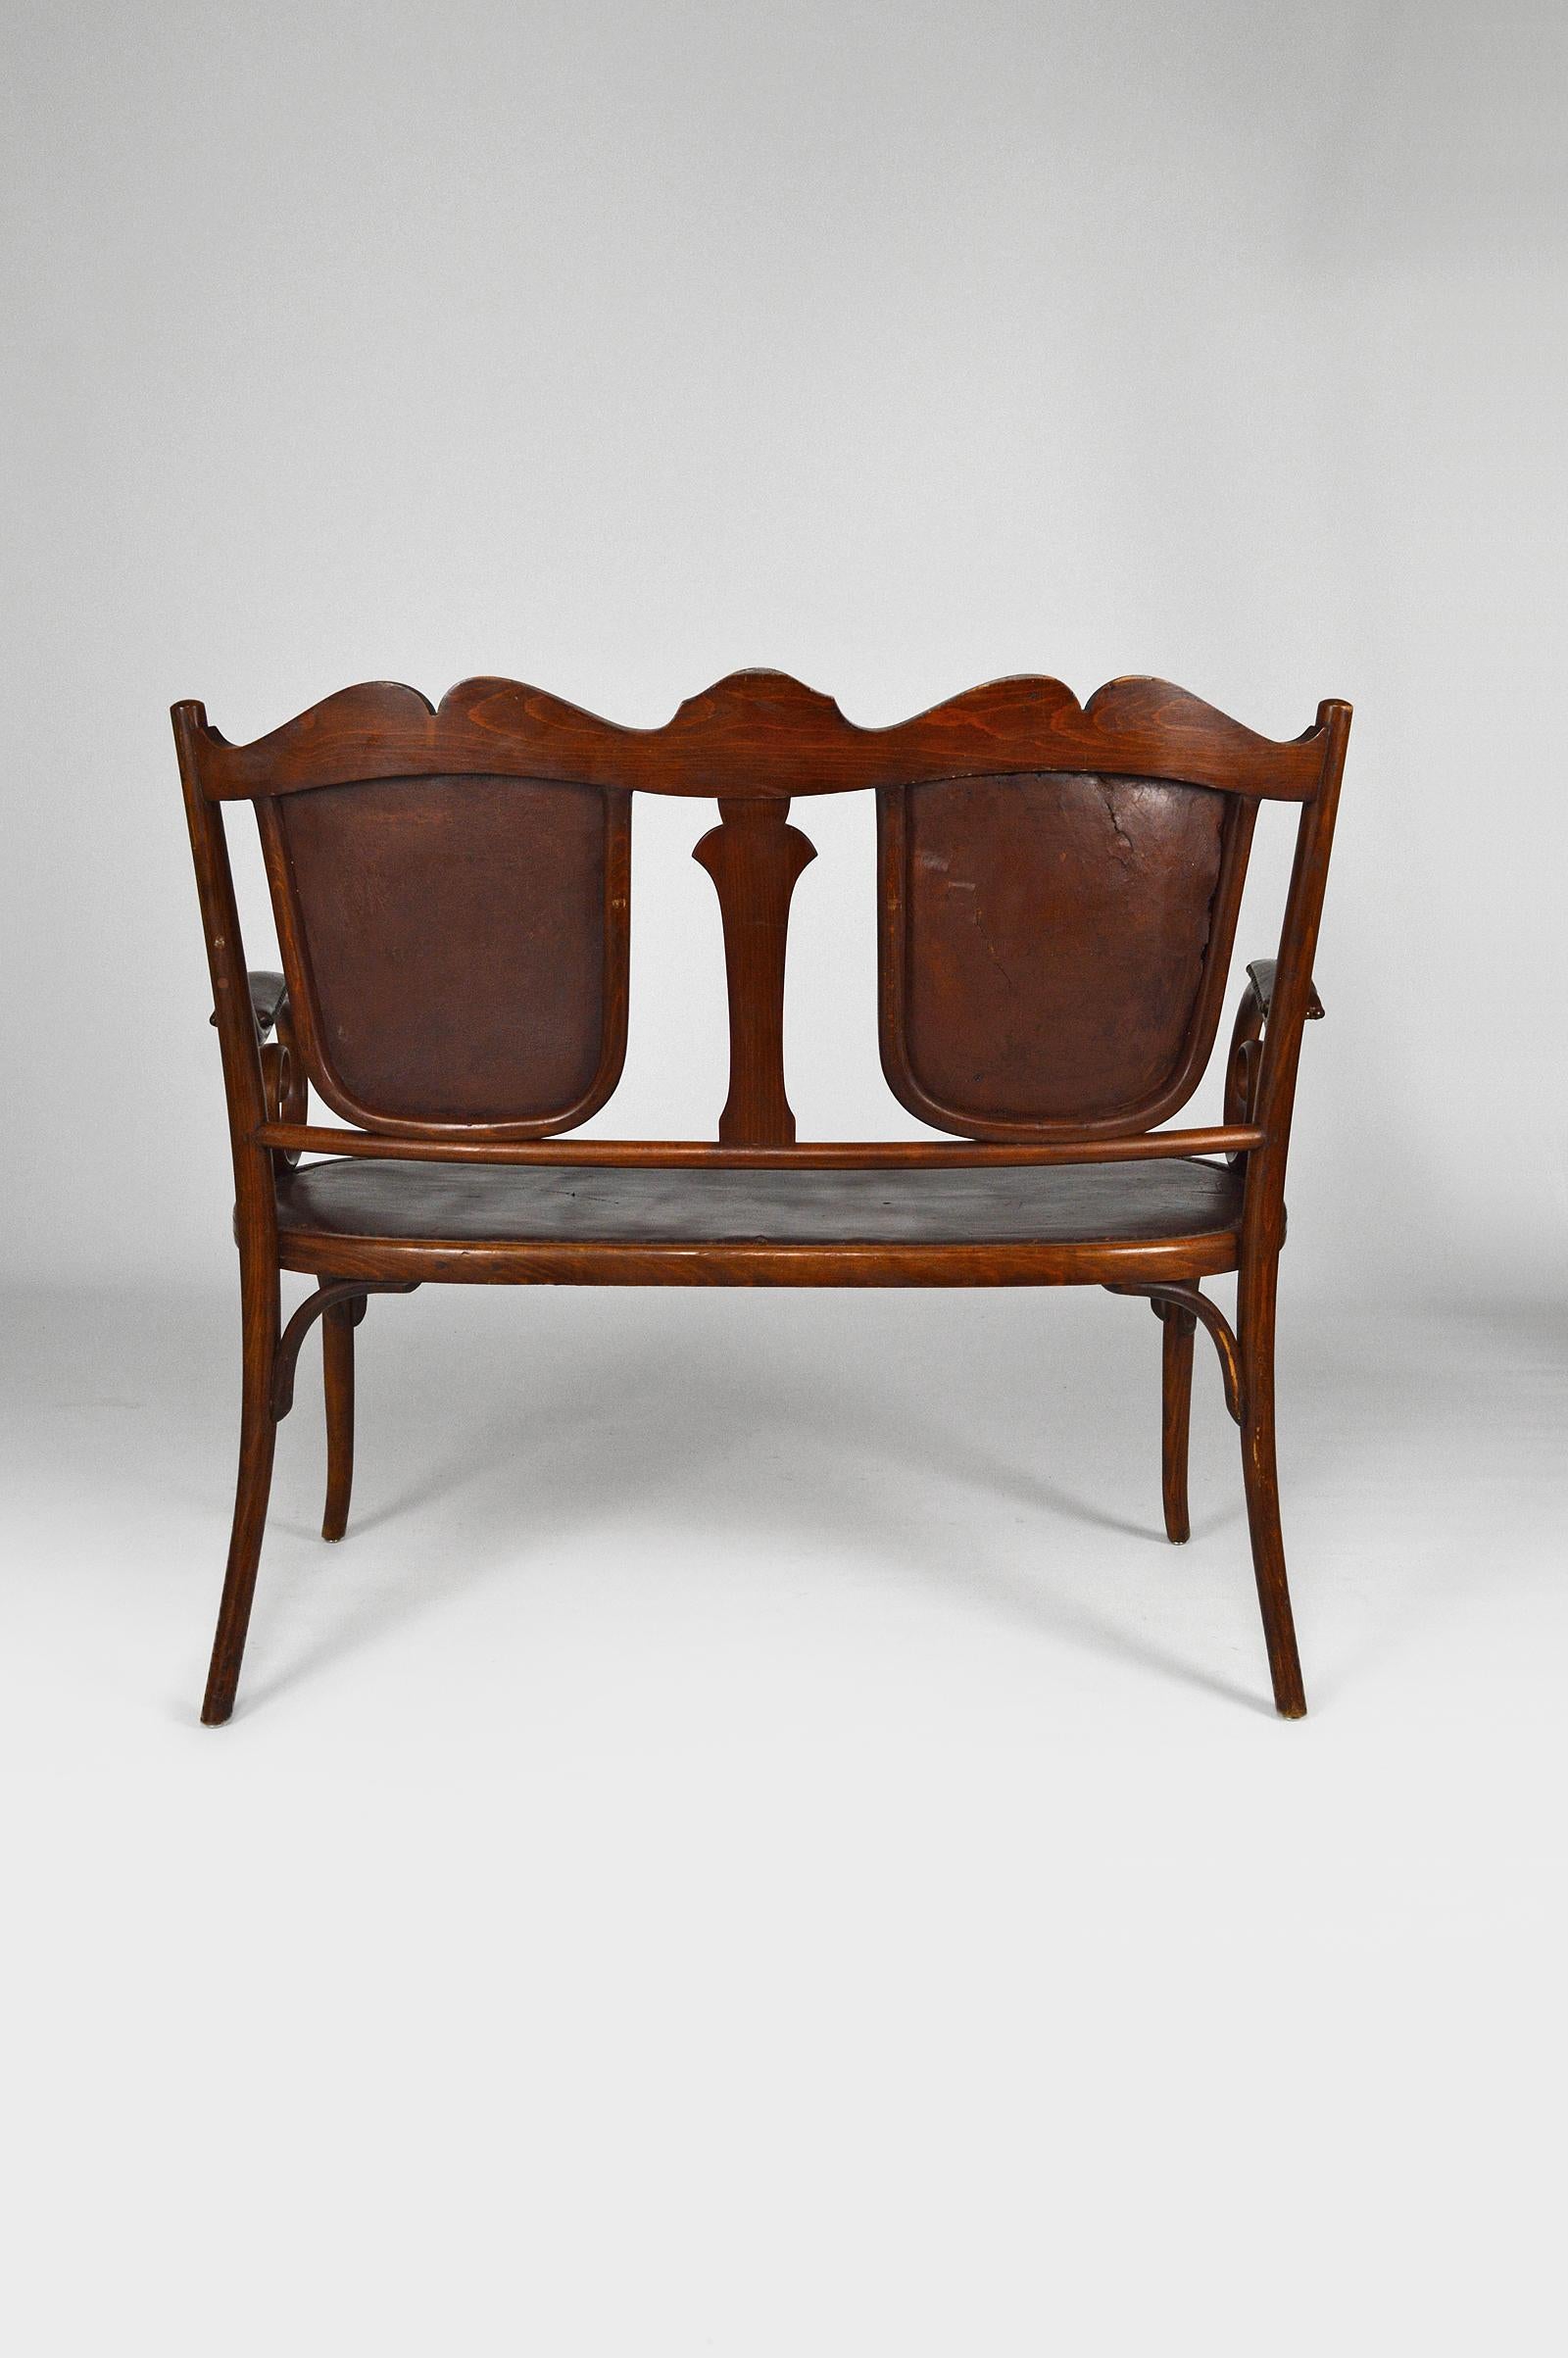 Art Nouveau Living Room Set by Fischel in Bentwood and Leather, circa 1910 1